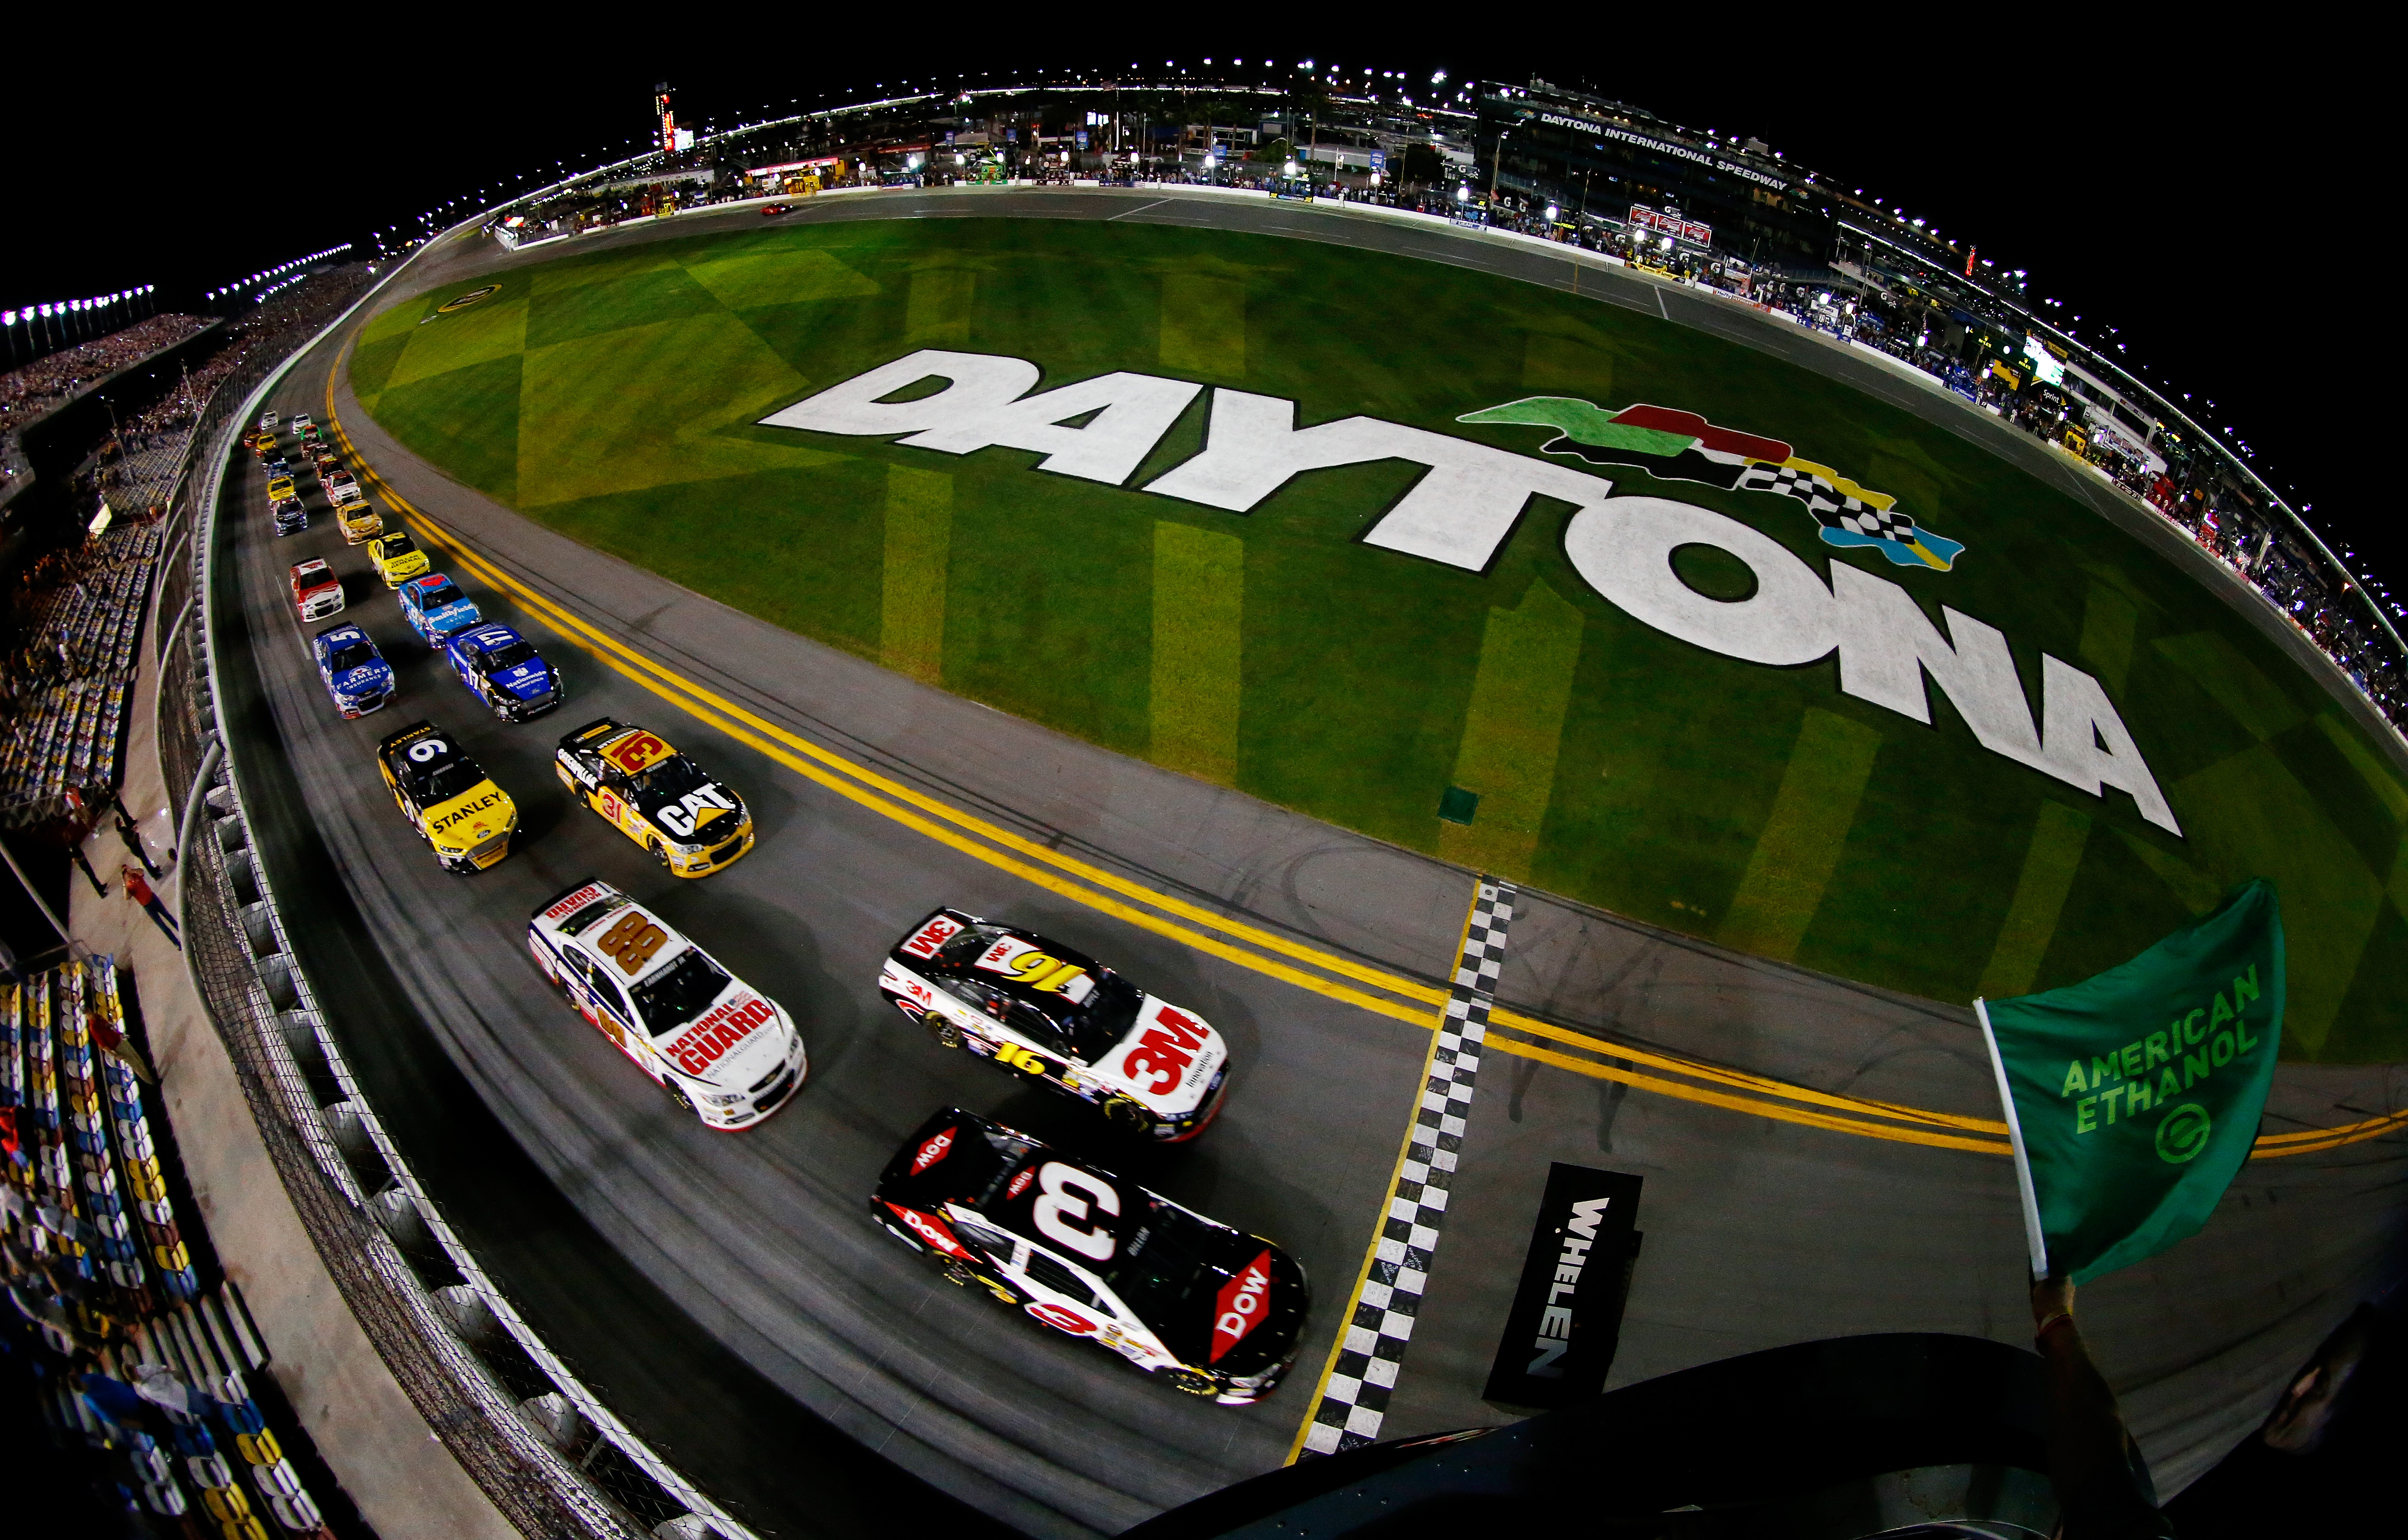 NASCAR at Daytona 2014: Weekend Schedule, Start Time, Practice, Qualifying, TV and Weather Info